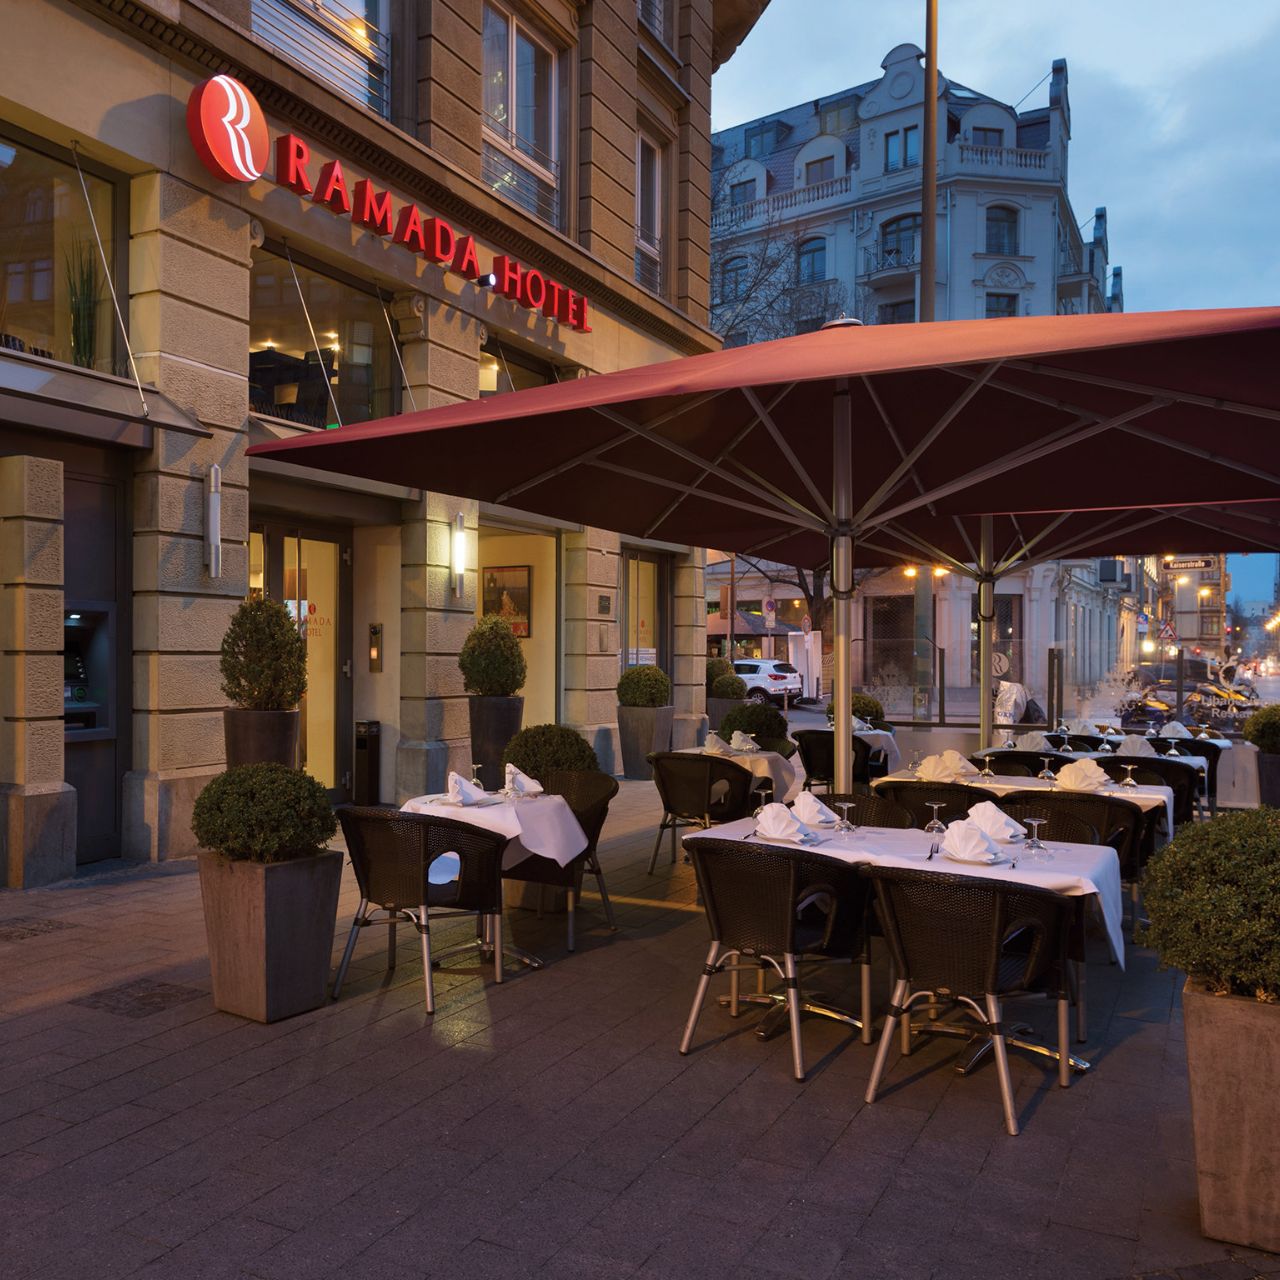 Hotel Ramada Financial District - Frankfurt am Main - Great prices at HOTEL  INFO